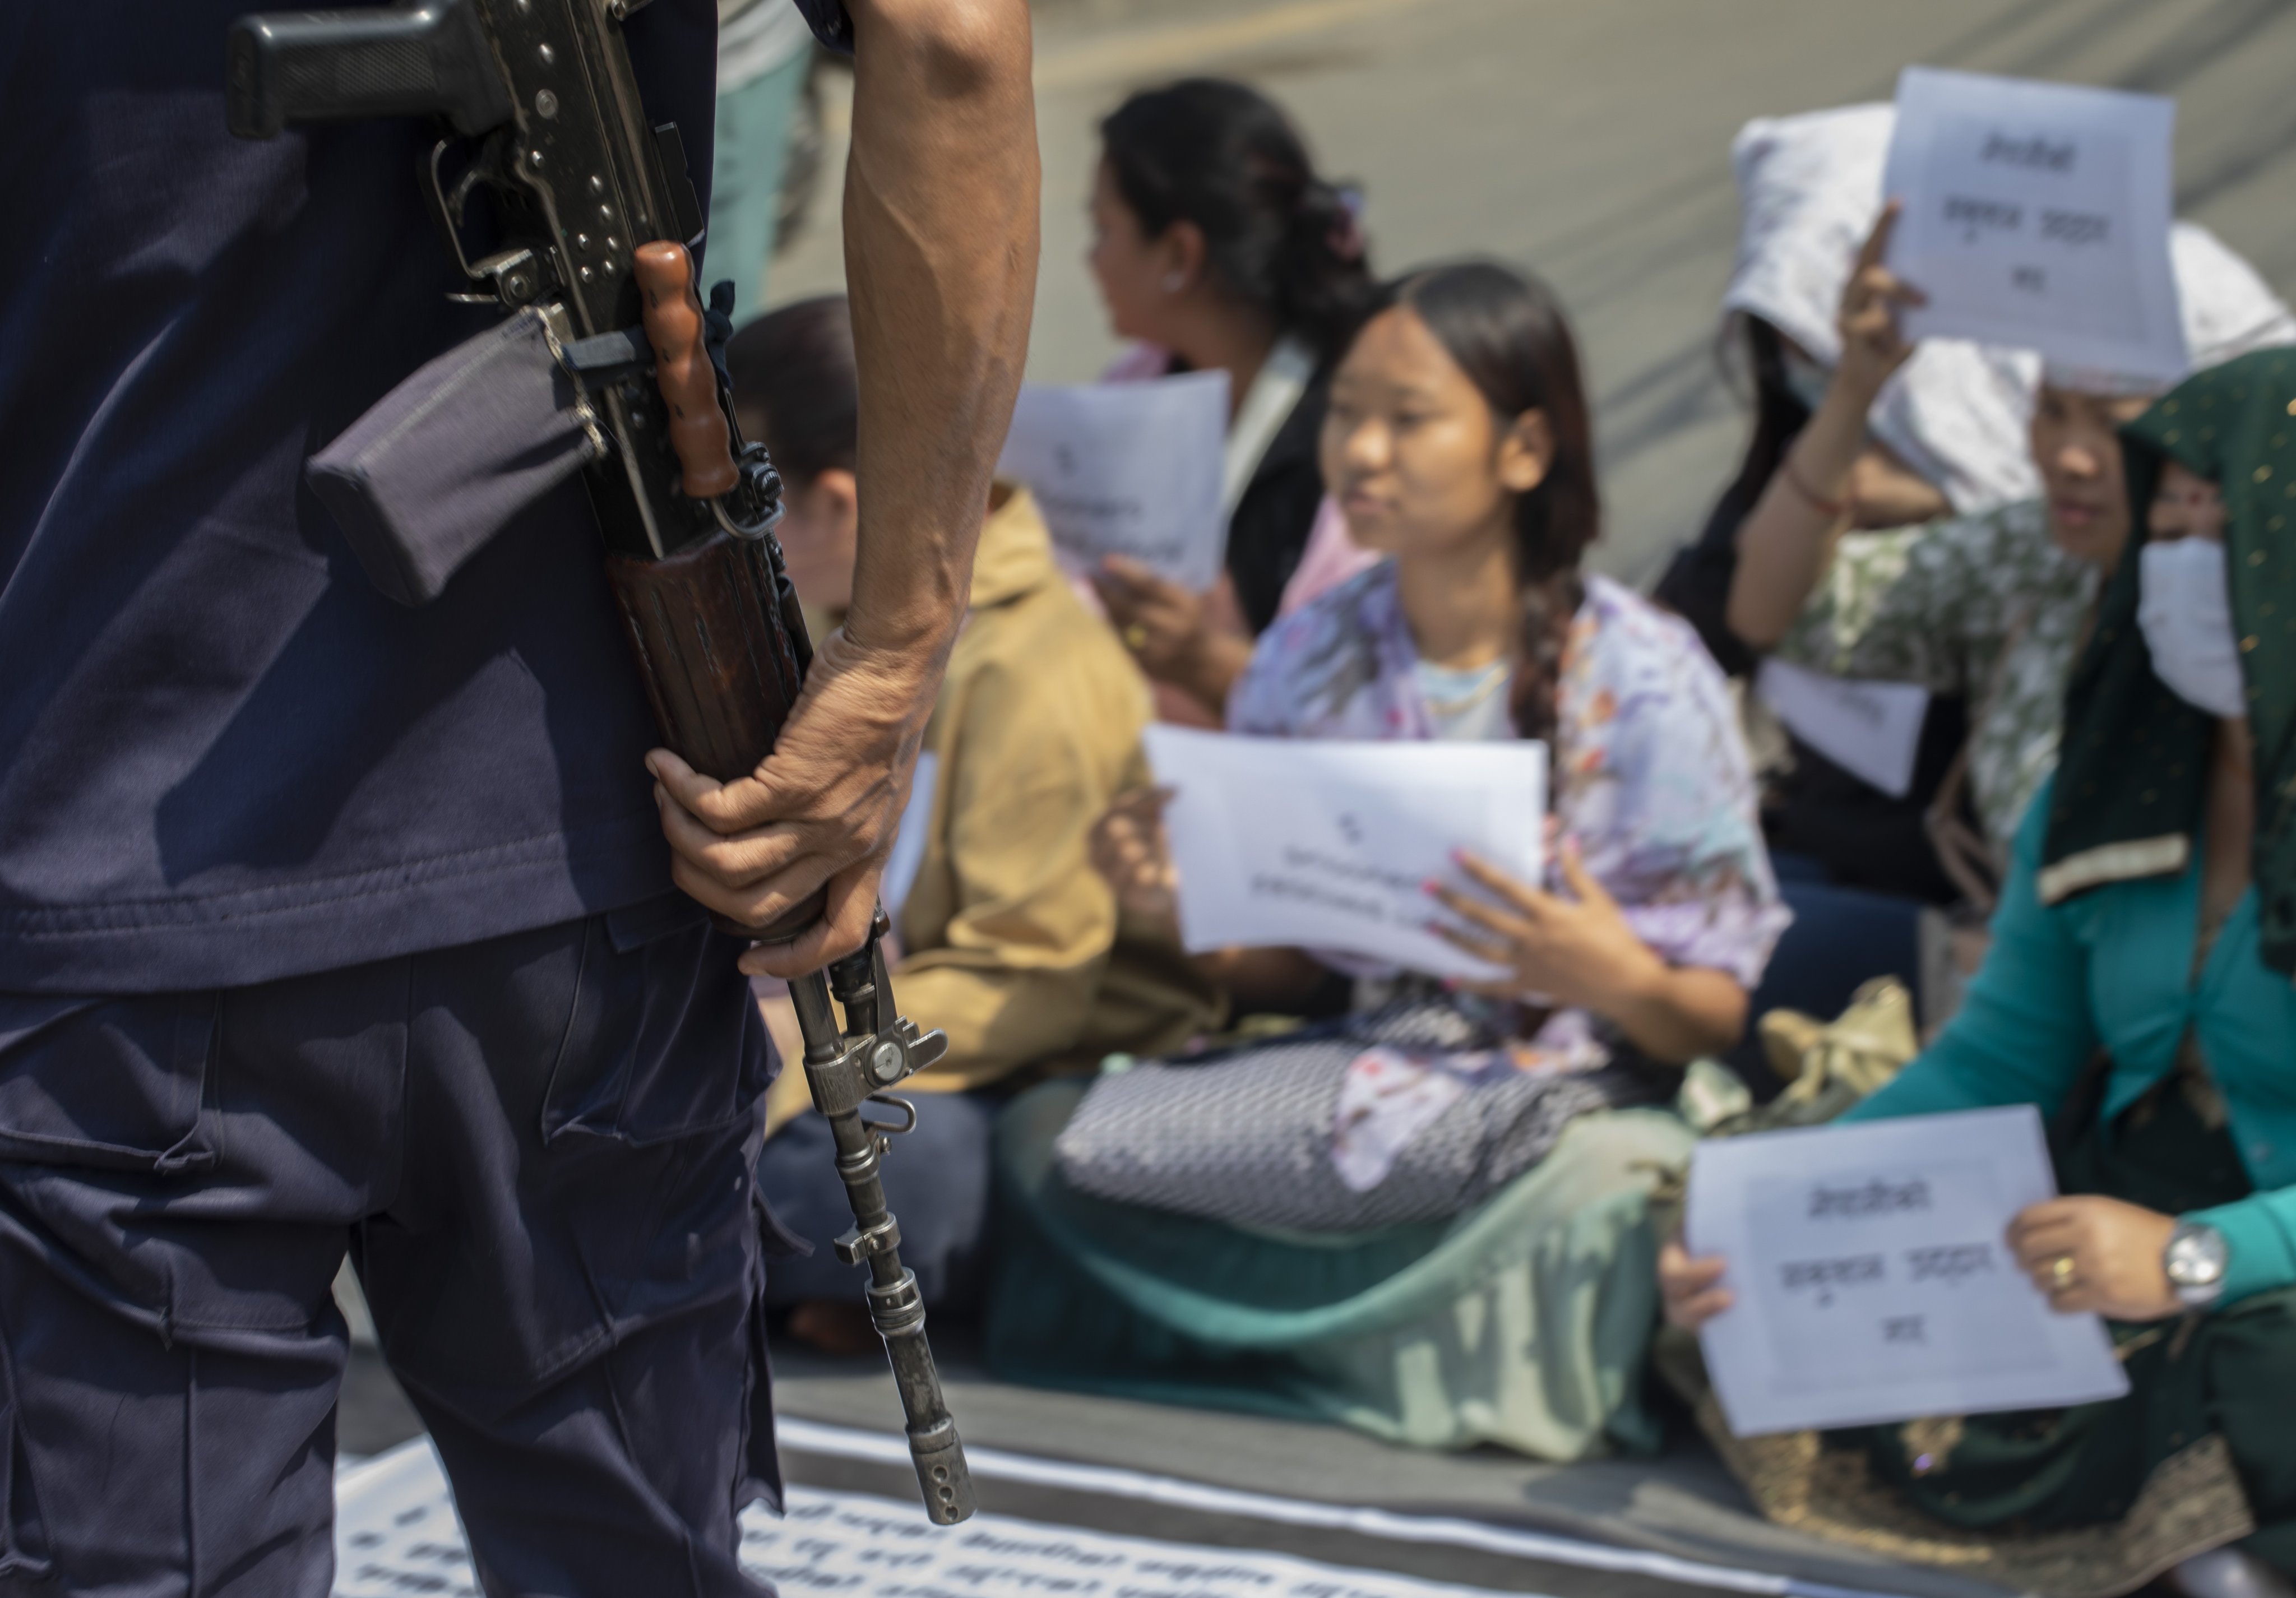 A security official looks on as family members of Nepalis who joined the Russian army stage a sit-in protest, in Kathmandu, urging their relatives’ safe return to Nepal. Photo: EPA-EFE